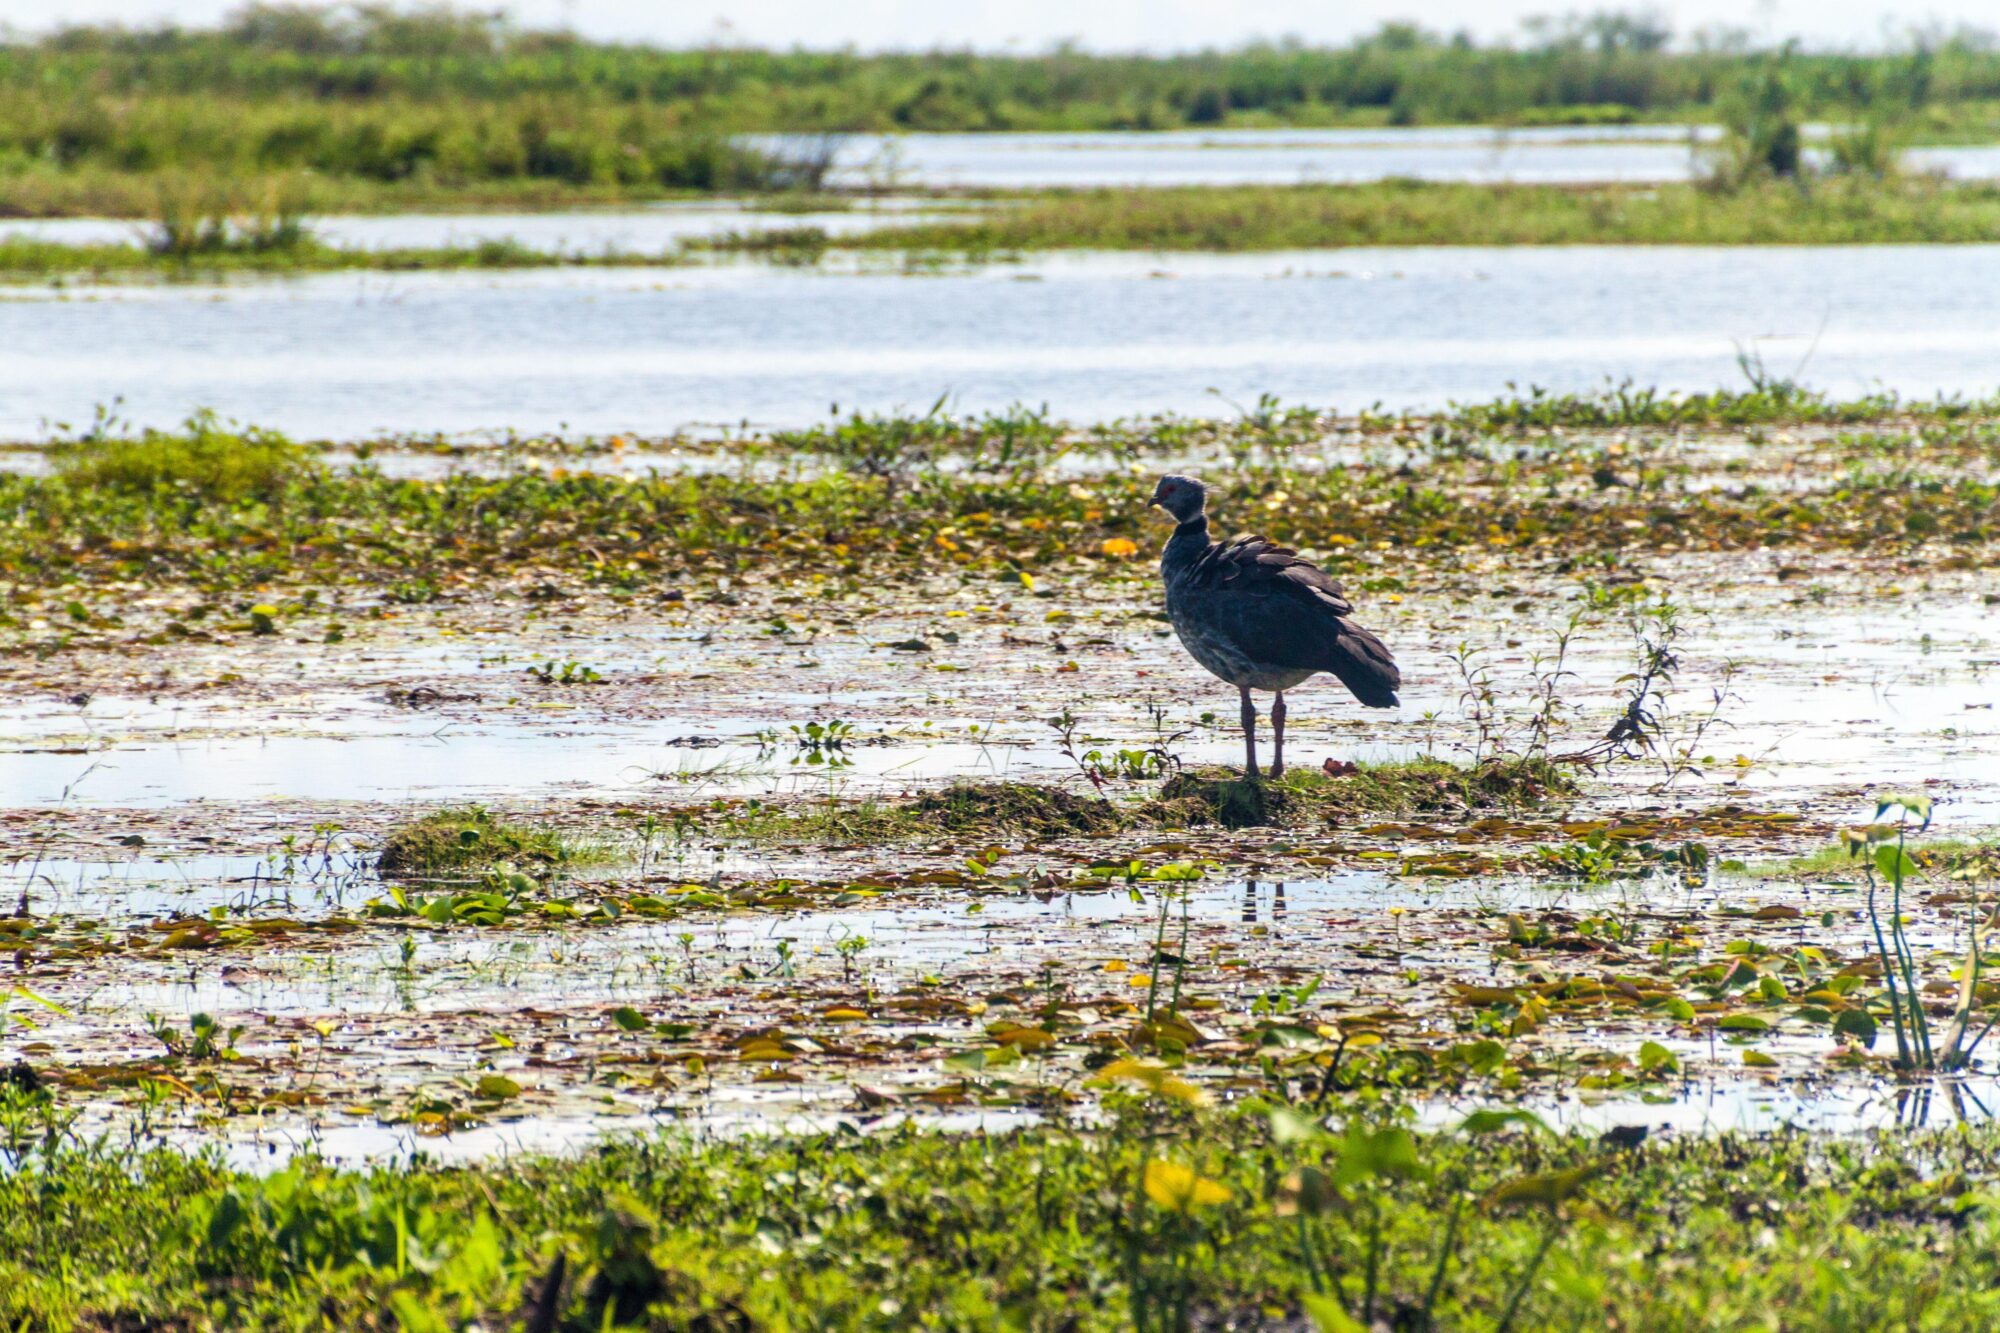 <p>Chauna torquata, popularly known as chajá, in the Iberá Wetlands, in the Argentine province of Corrientes. The Submeridional Lowlands, of which Corrientes is part, is home to more than 200 bird species, several of them endangered (Image: Matyas Rehak / Alamy)</p>